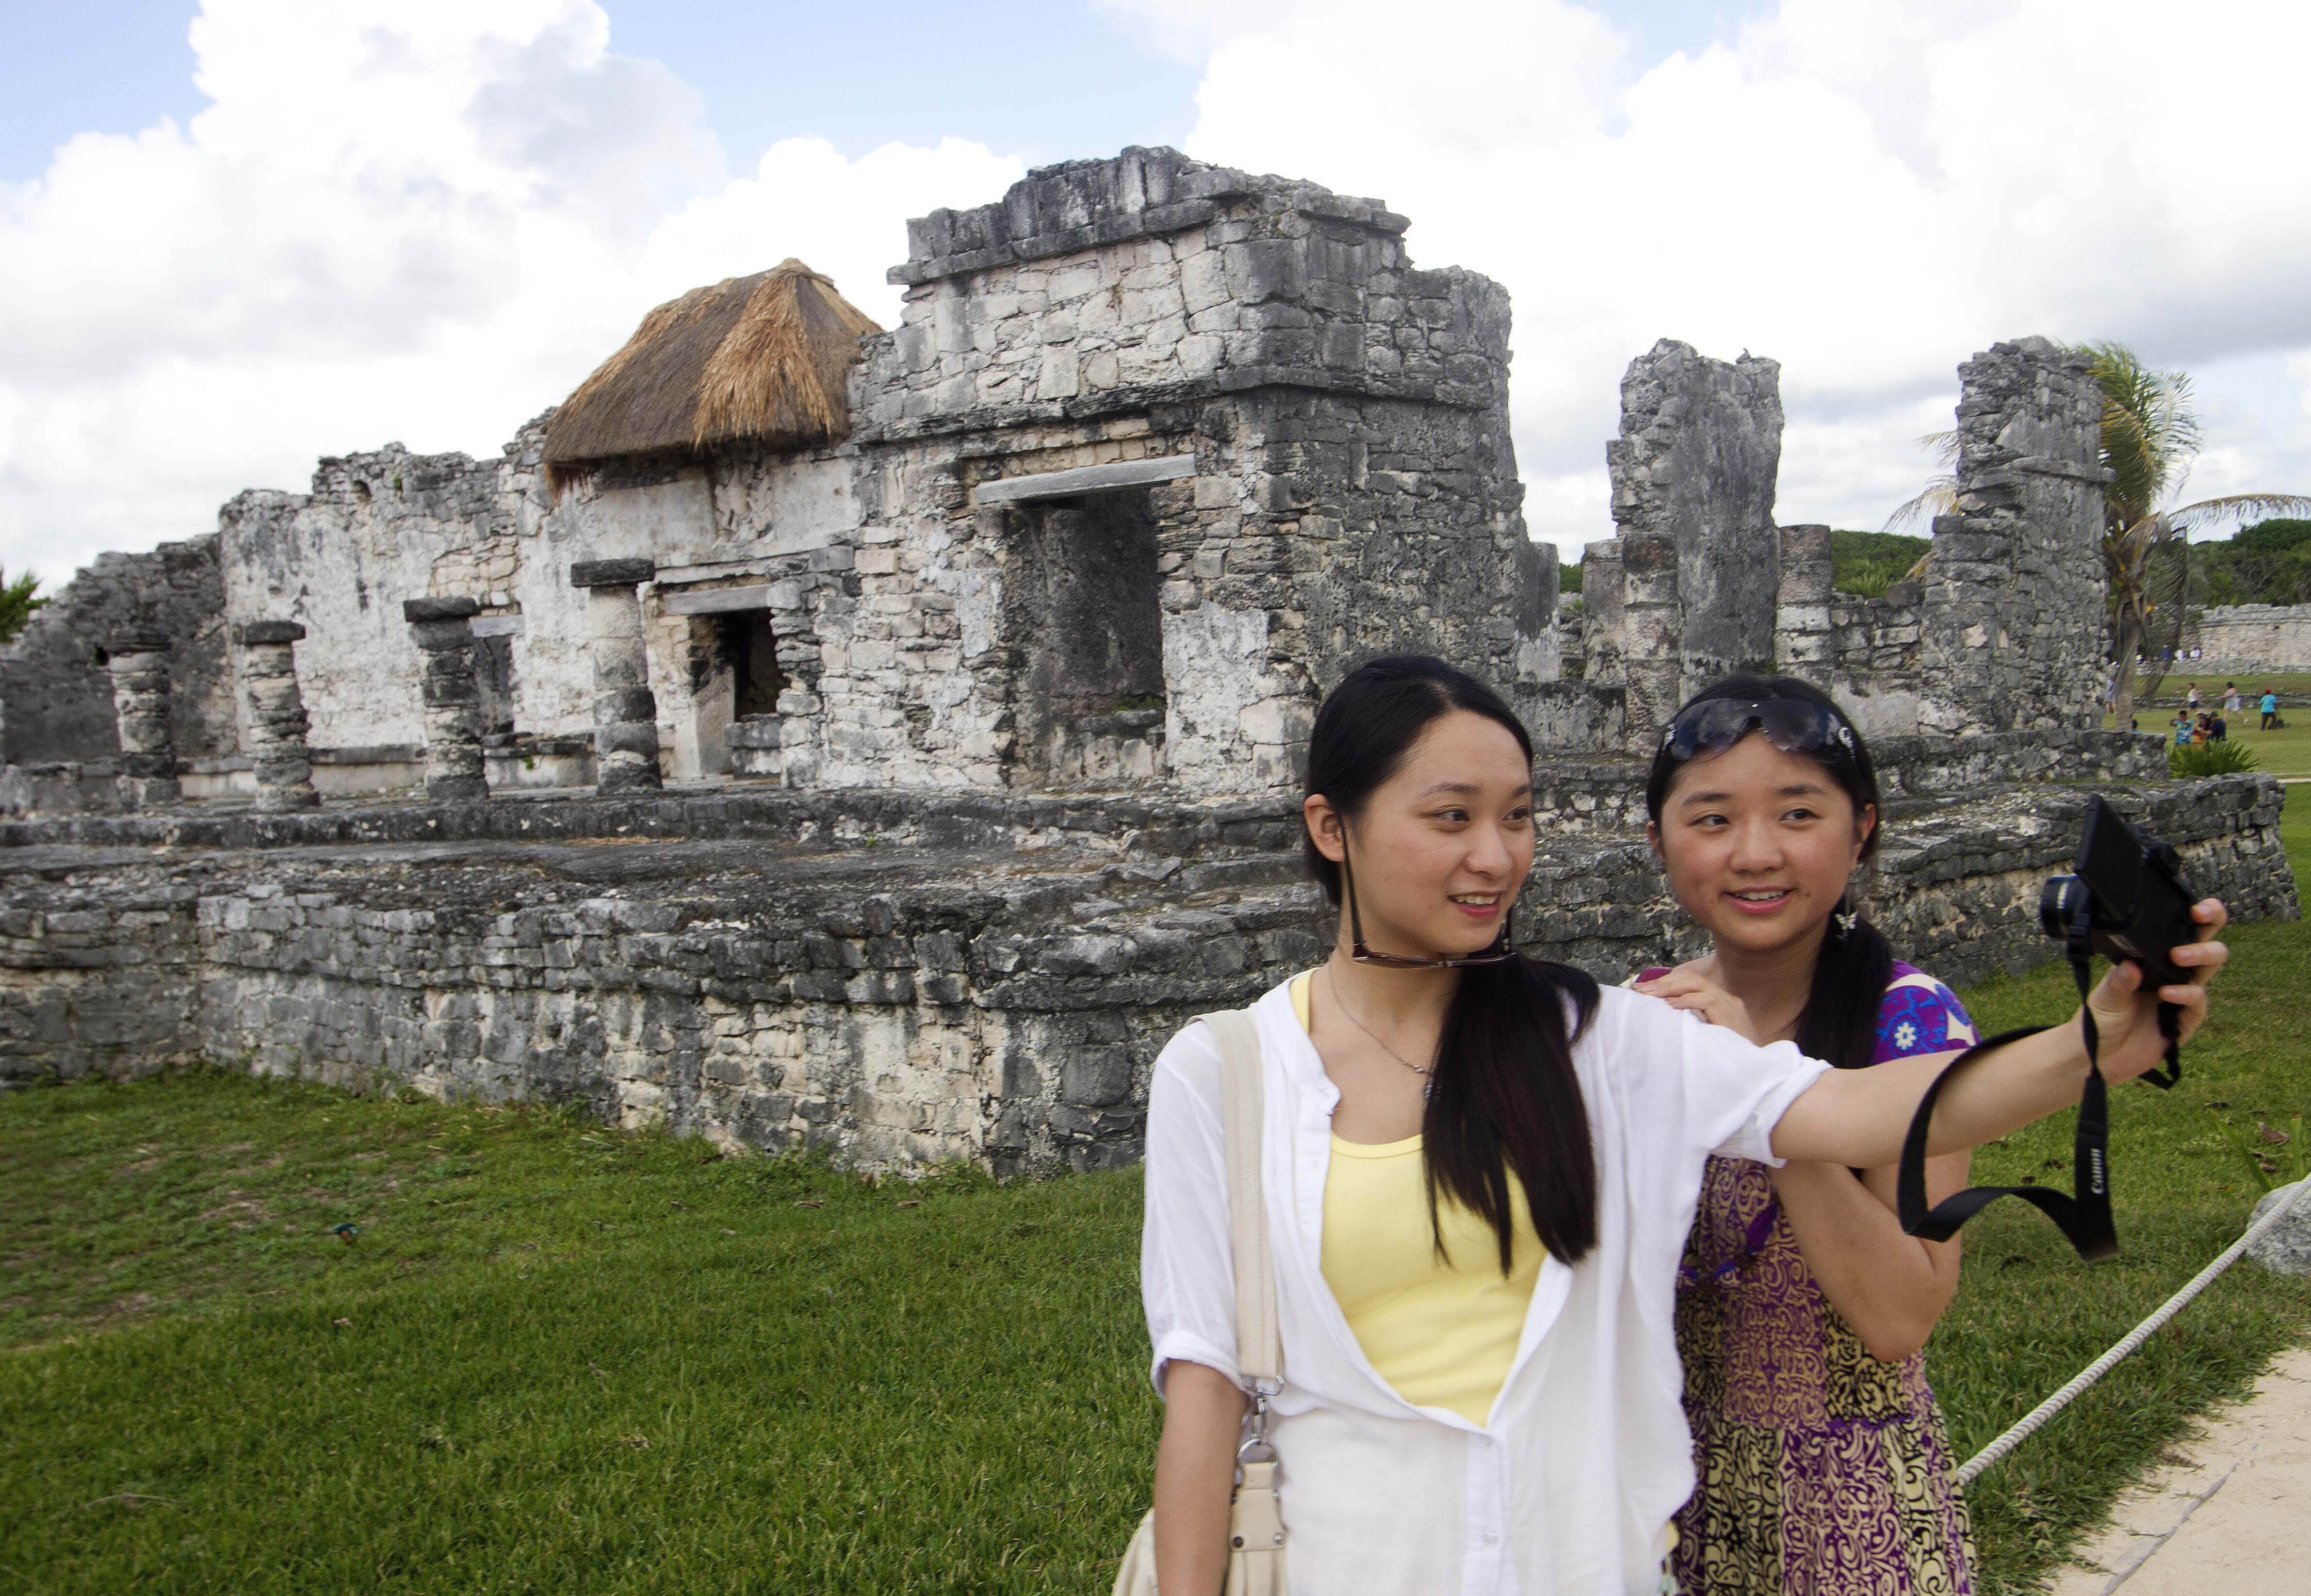 Chinese tourists take selfies of themselves in Cancun, Mexico, as a surge in travel could benefit the shares of online travel agencies like Ctrip and Qunar. Photo: AFP